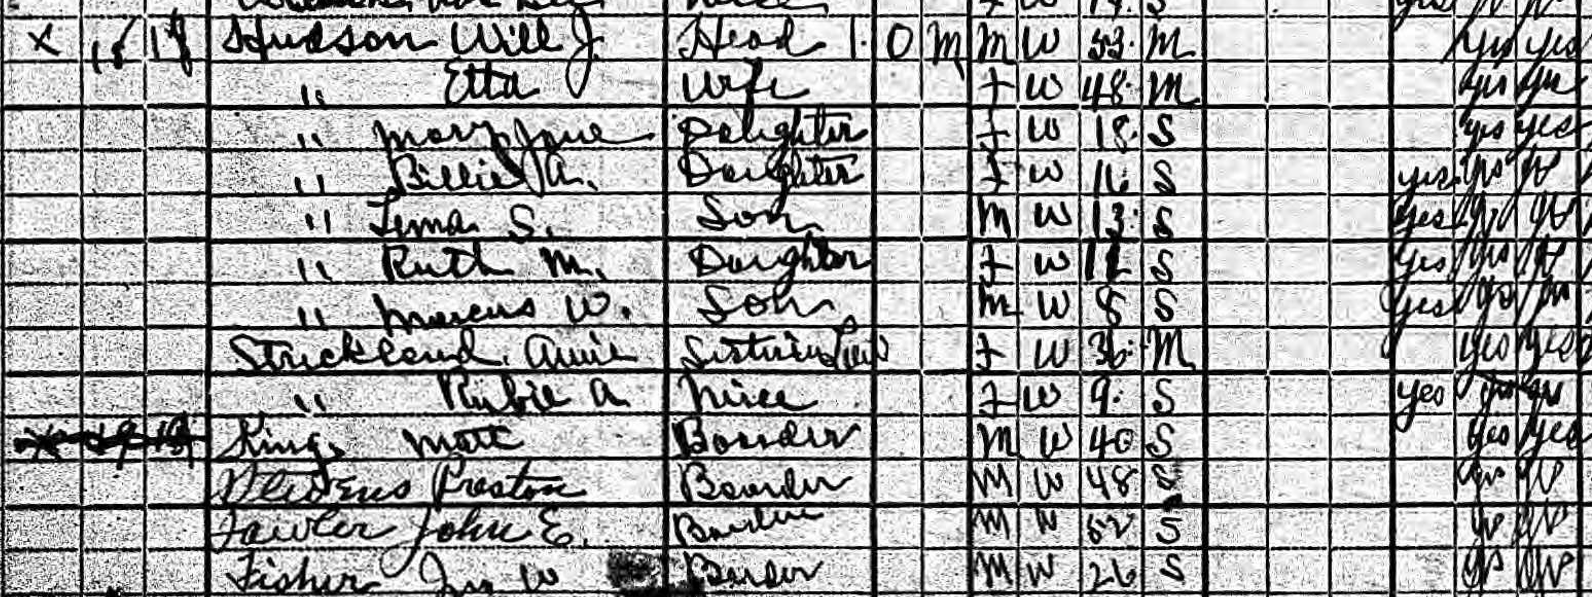 1920 Census - North Clinton Township, Sampson Co., NC. - William James Hudson (Excerpt)